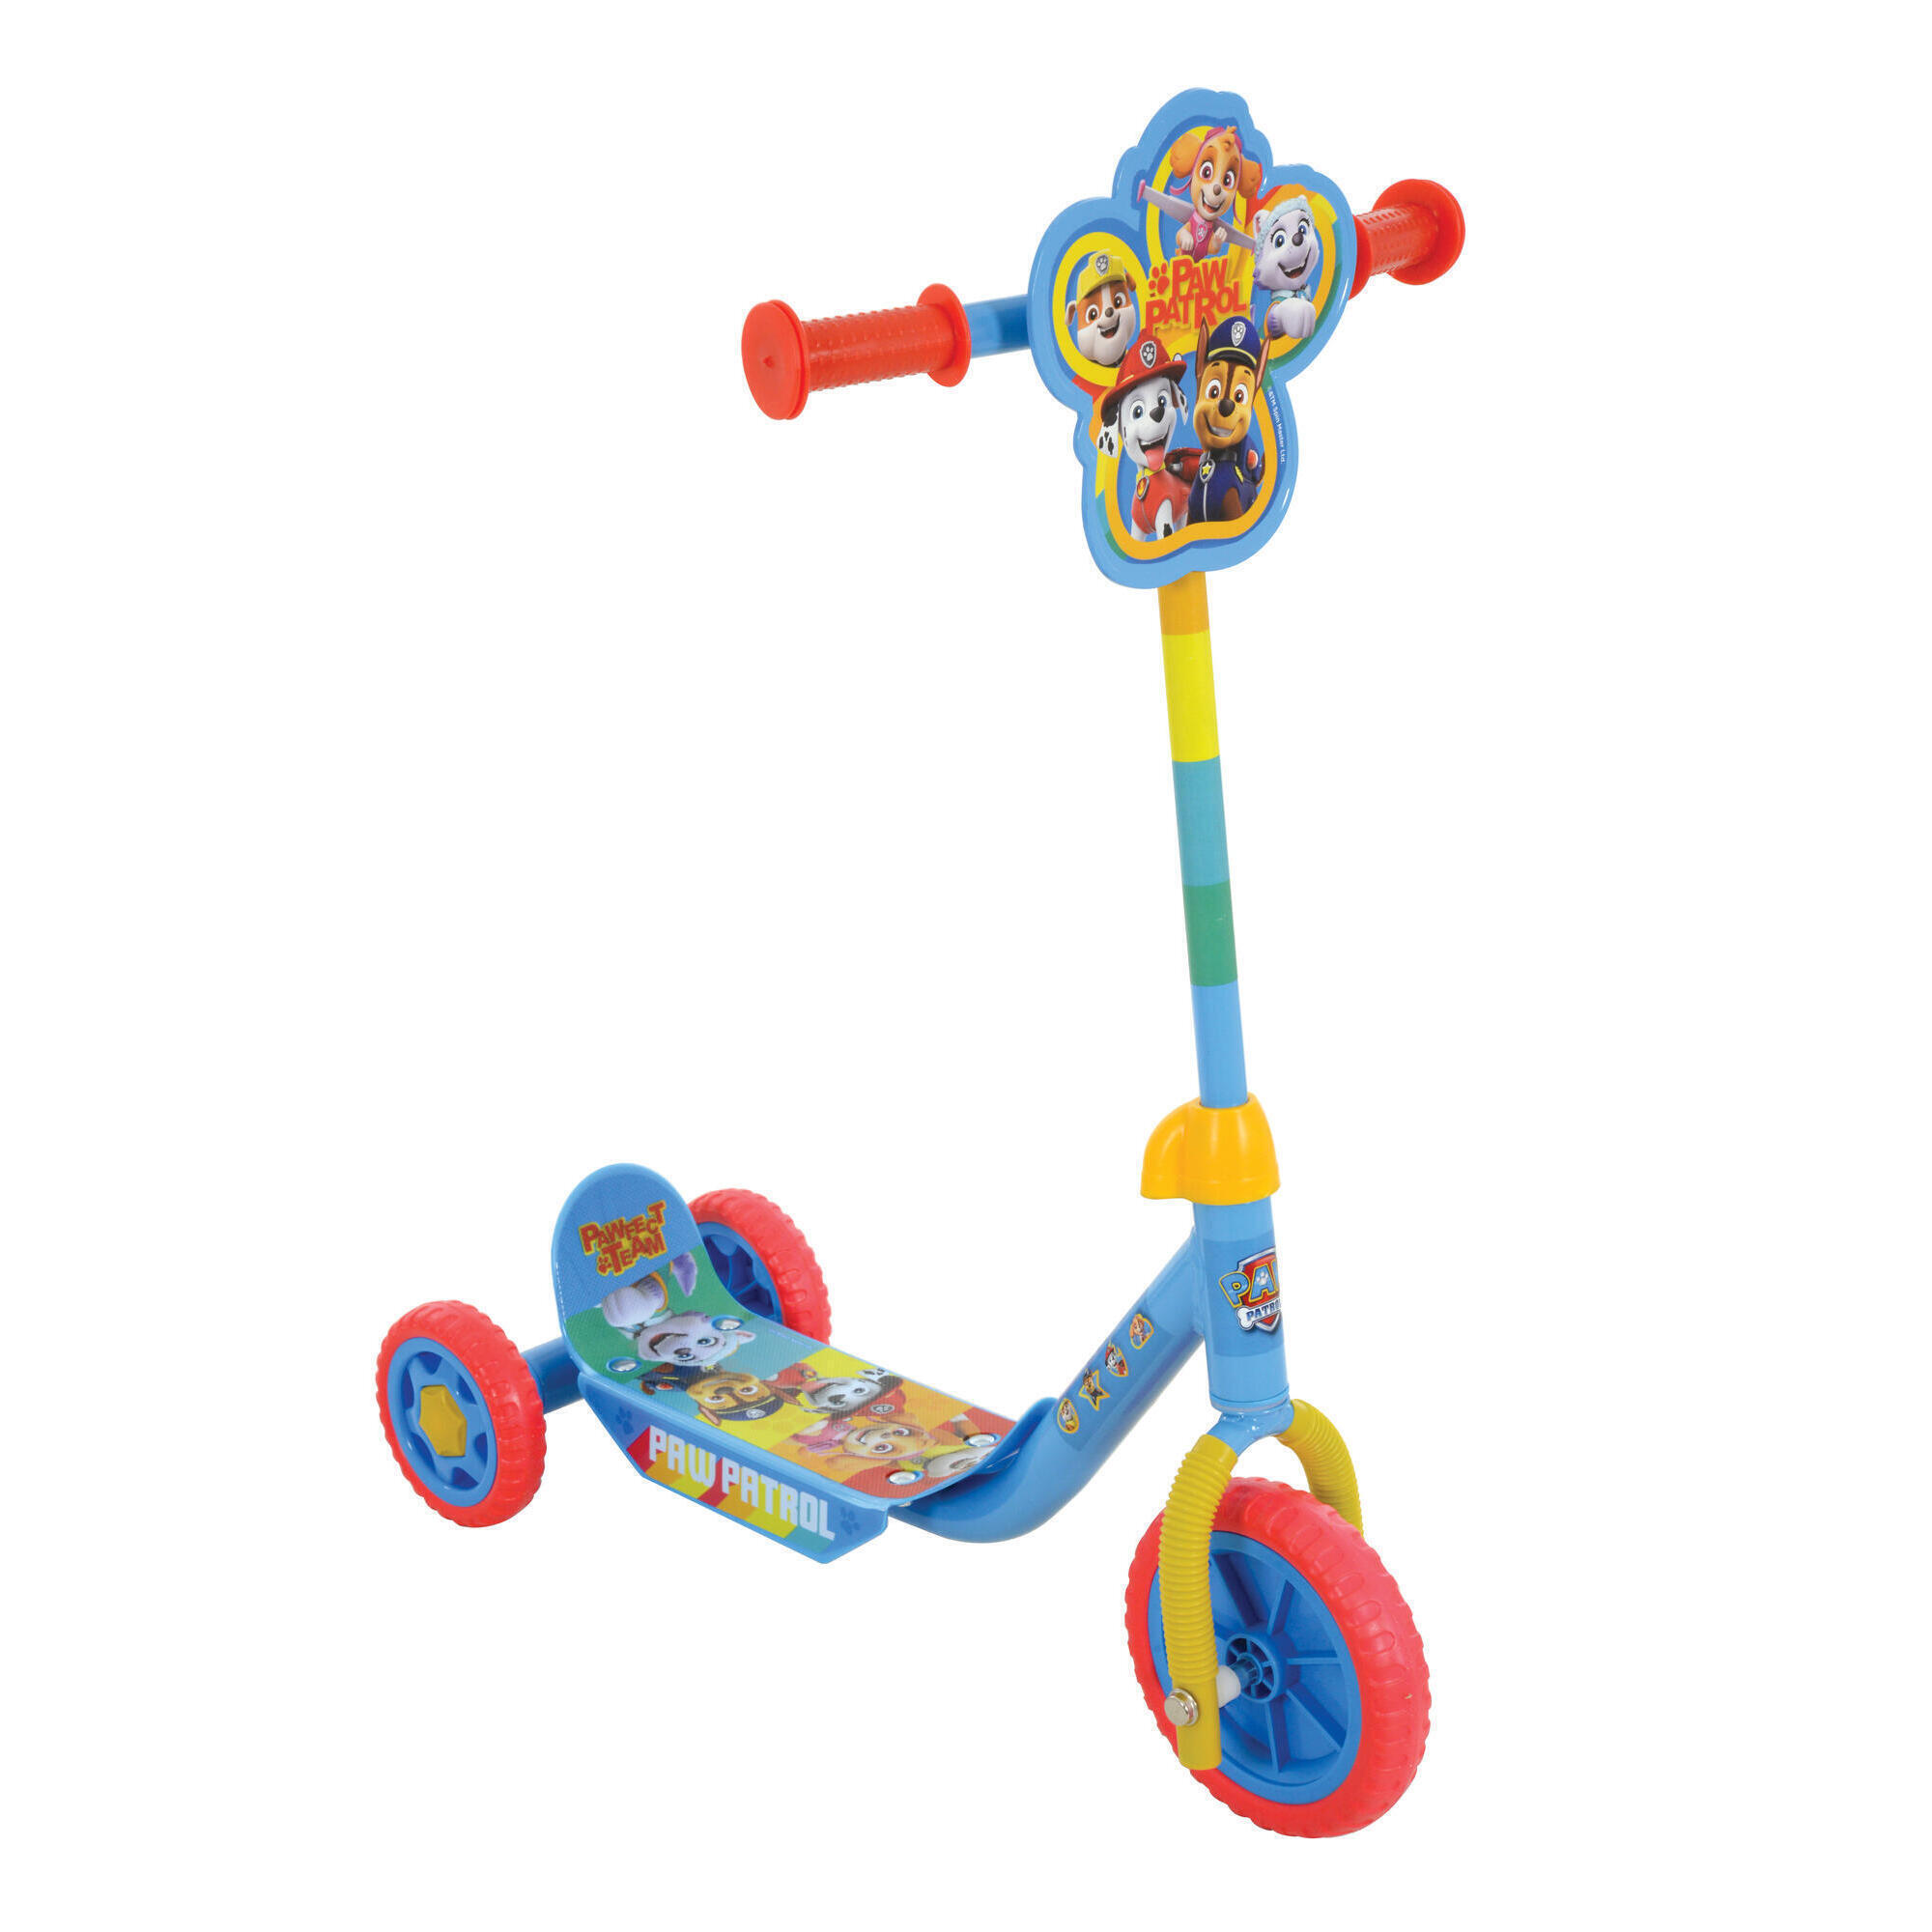 PAW PATROL Paw Patrol Deluxe Tri-Scooter